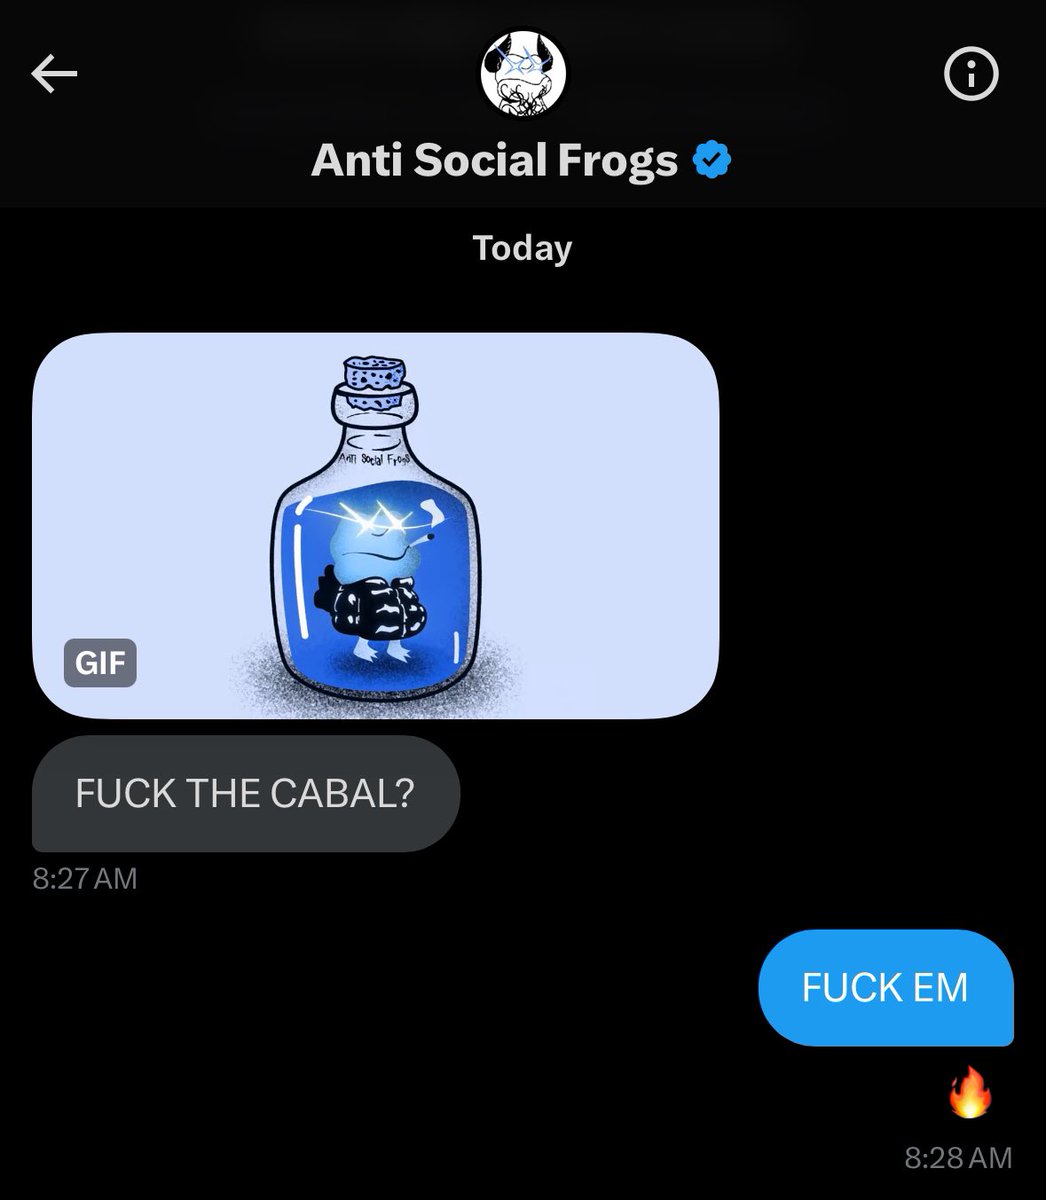 Look at me, I’m the cabal now 👀👈 @AntiSocialFrogs